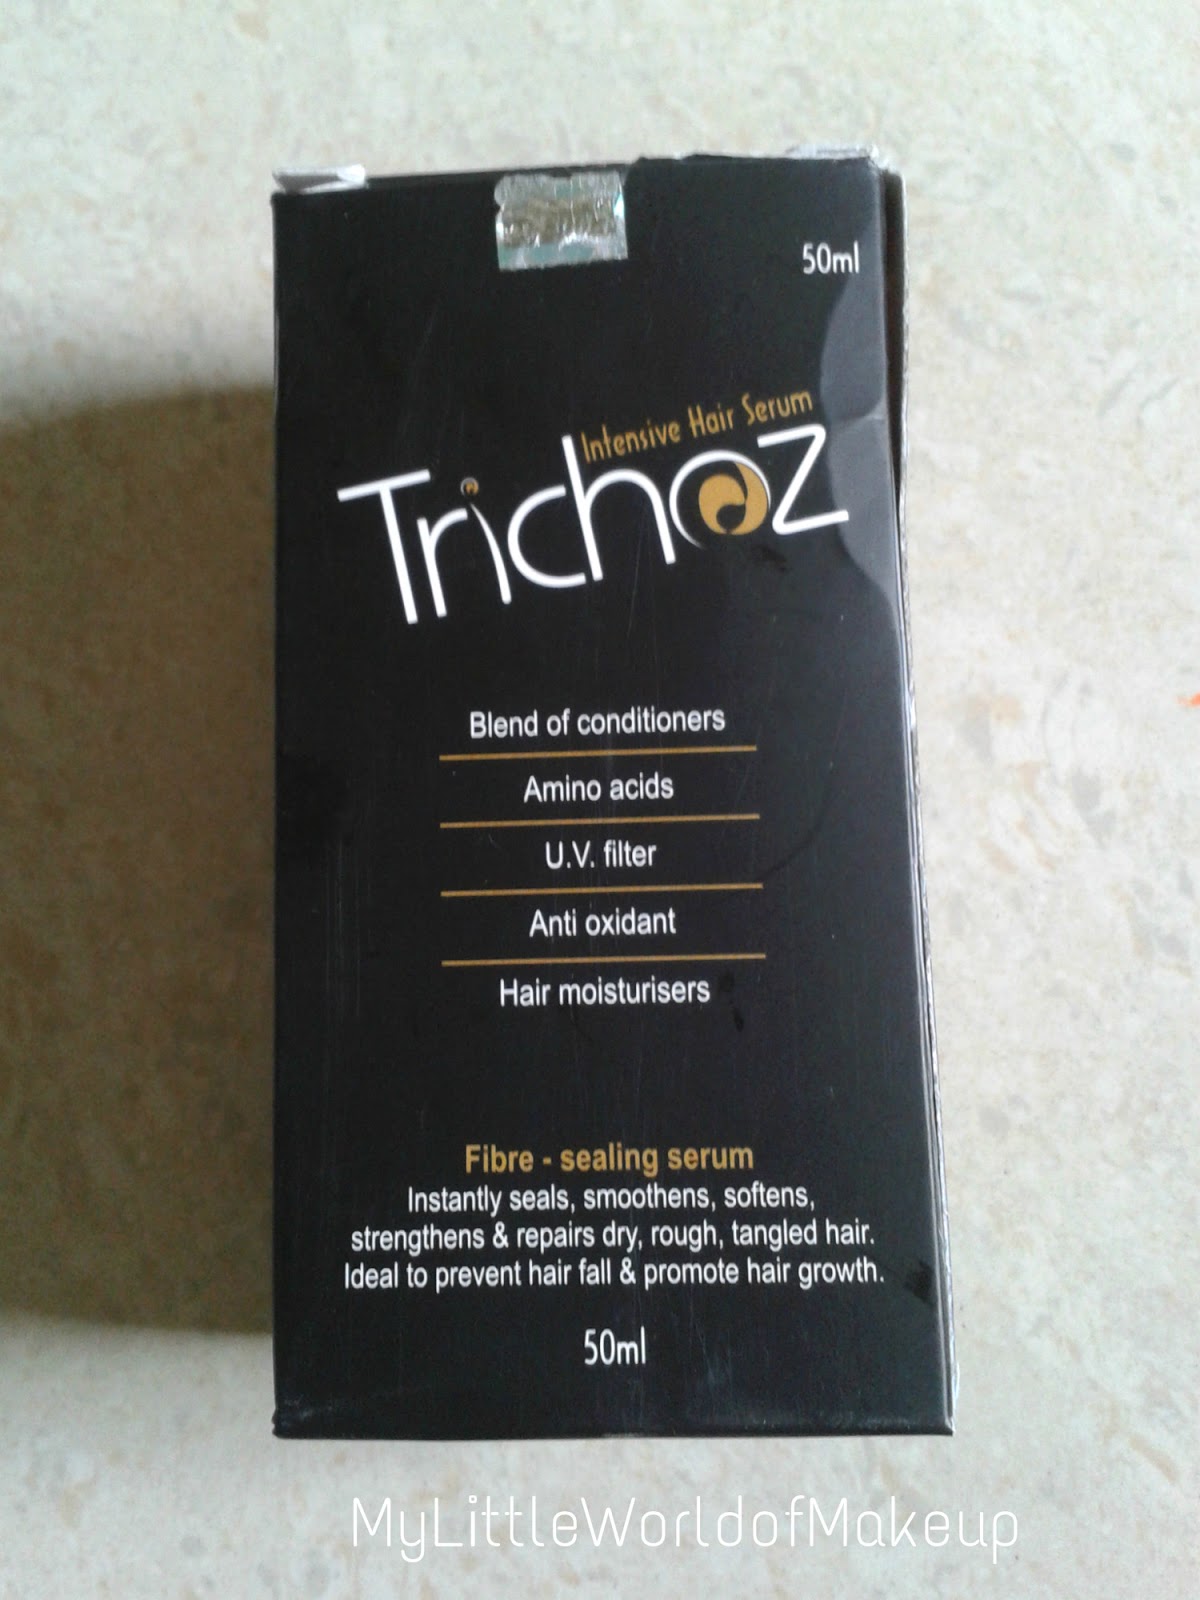 Trichoz Hair Serum 50ml Each Buy combo pack of 4 bottles at best price  in India  1mg